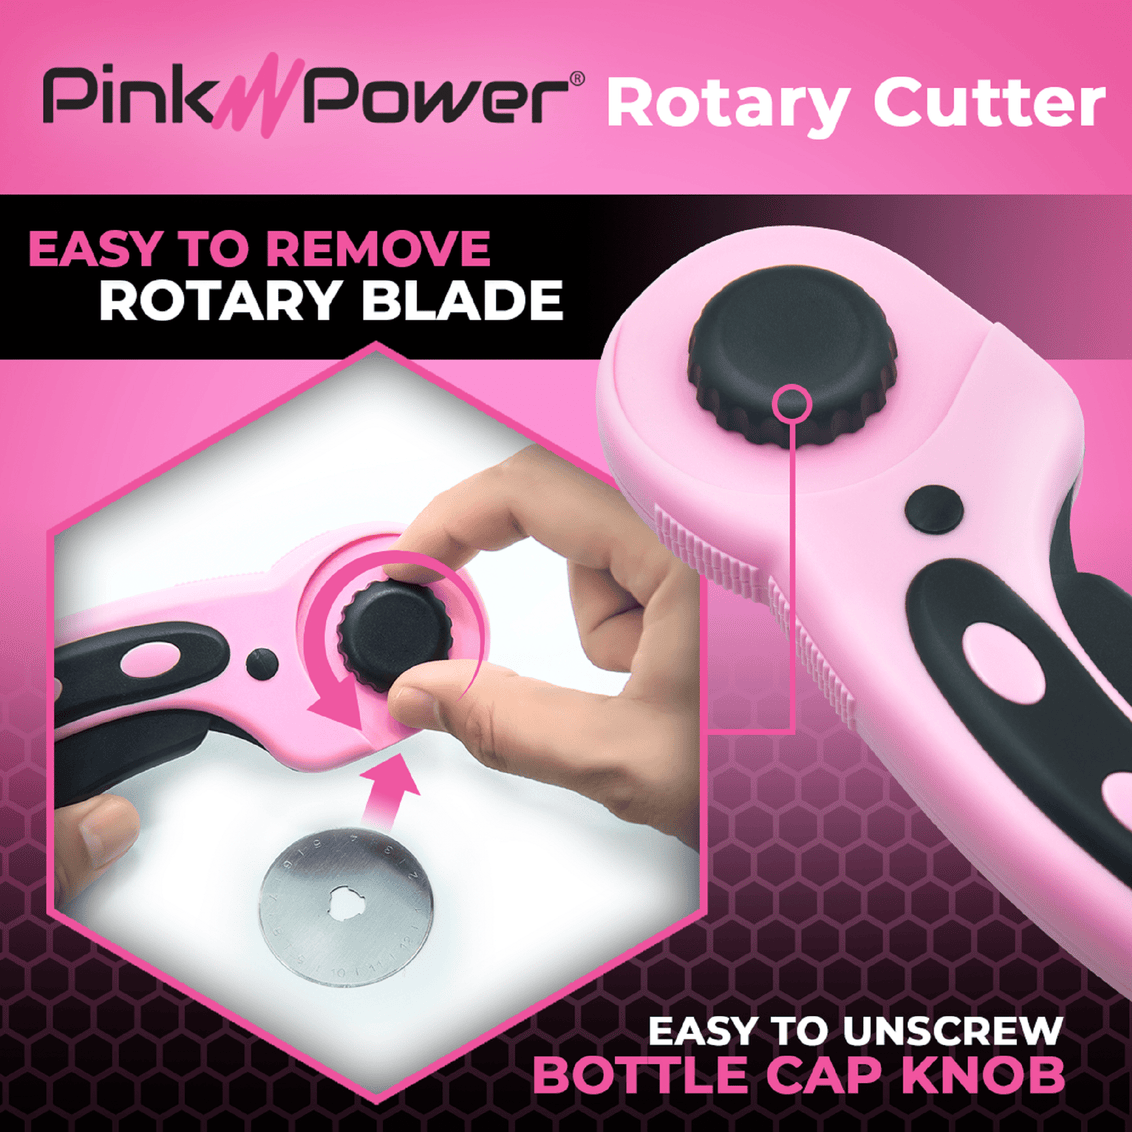 45mm MANUAL ROTARY CUTTER SET Craft Accessory Pink Power 